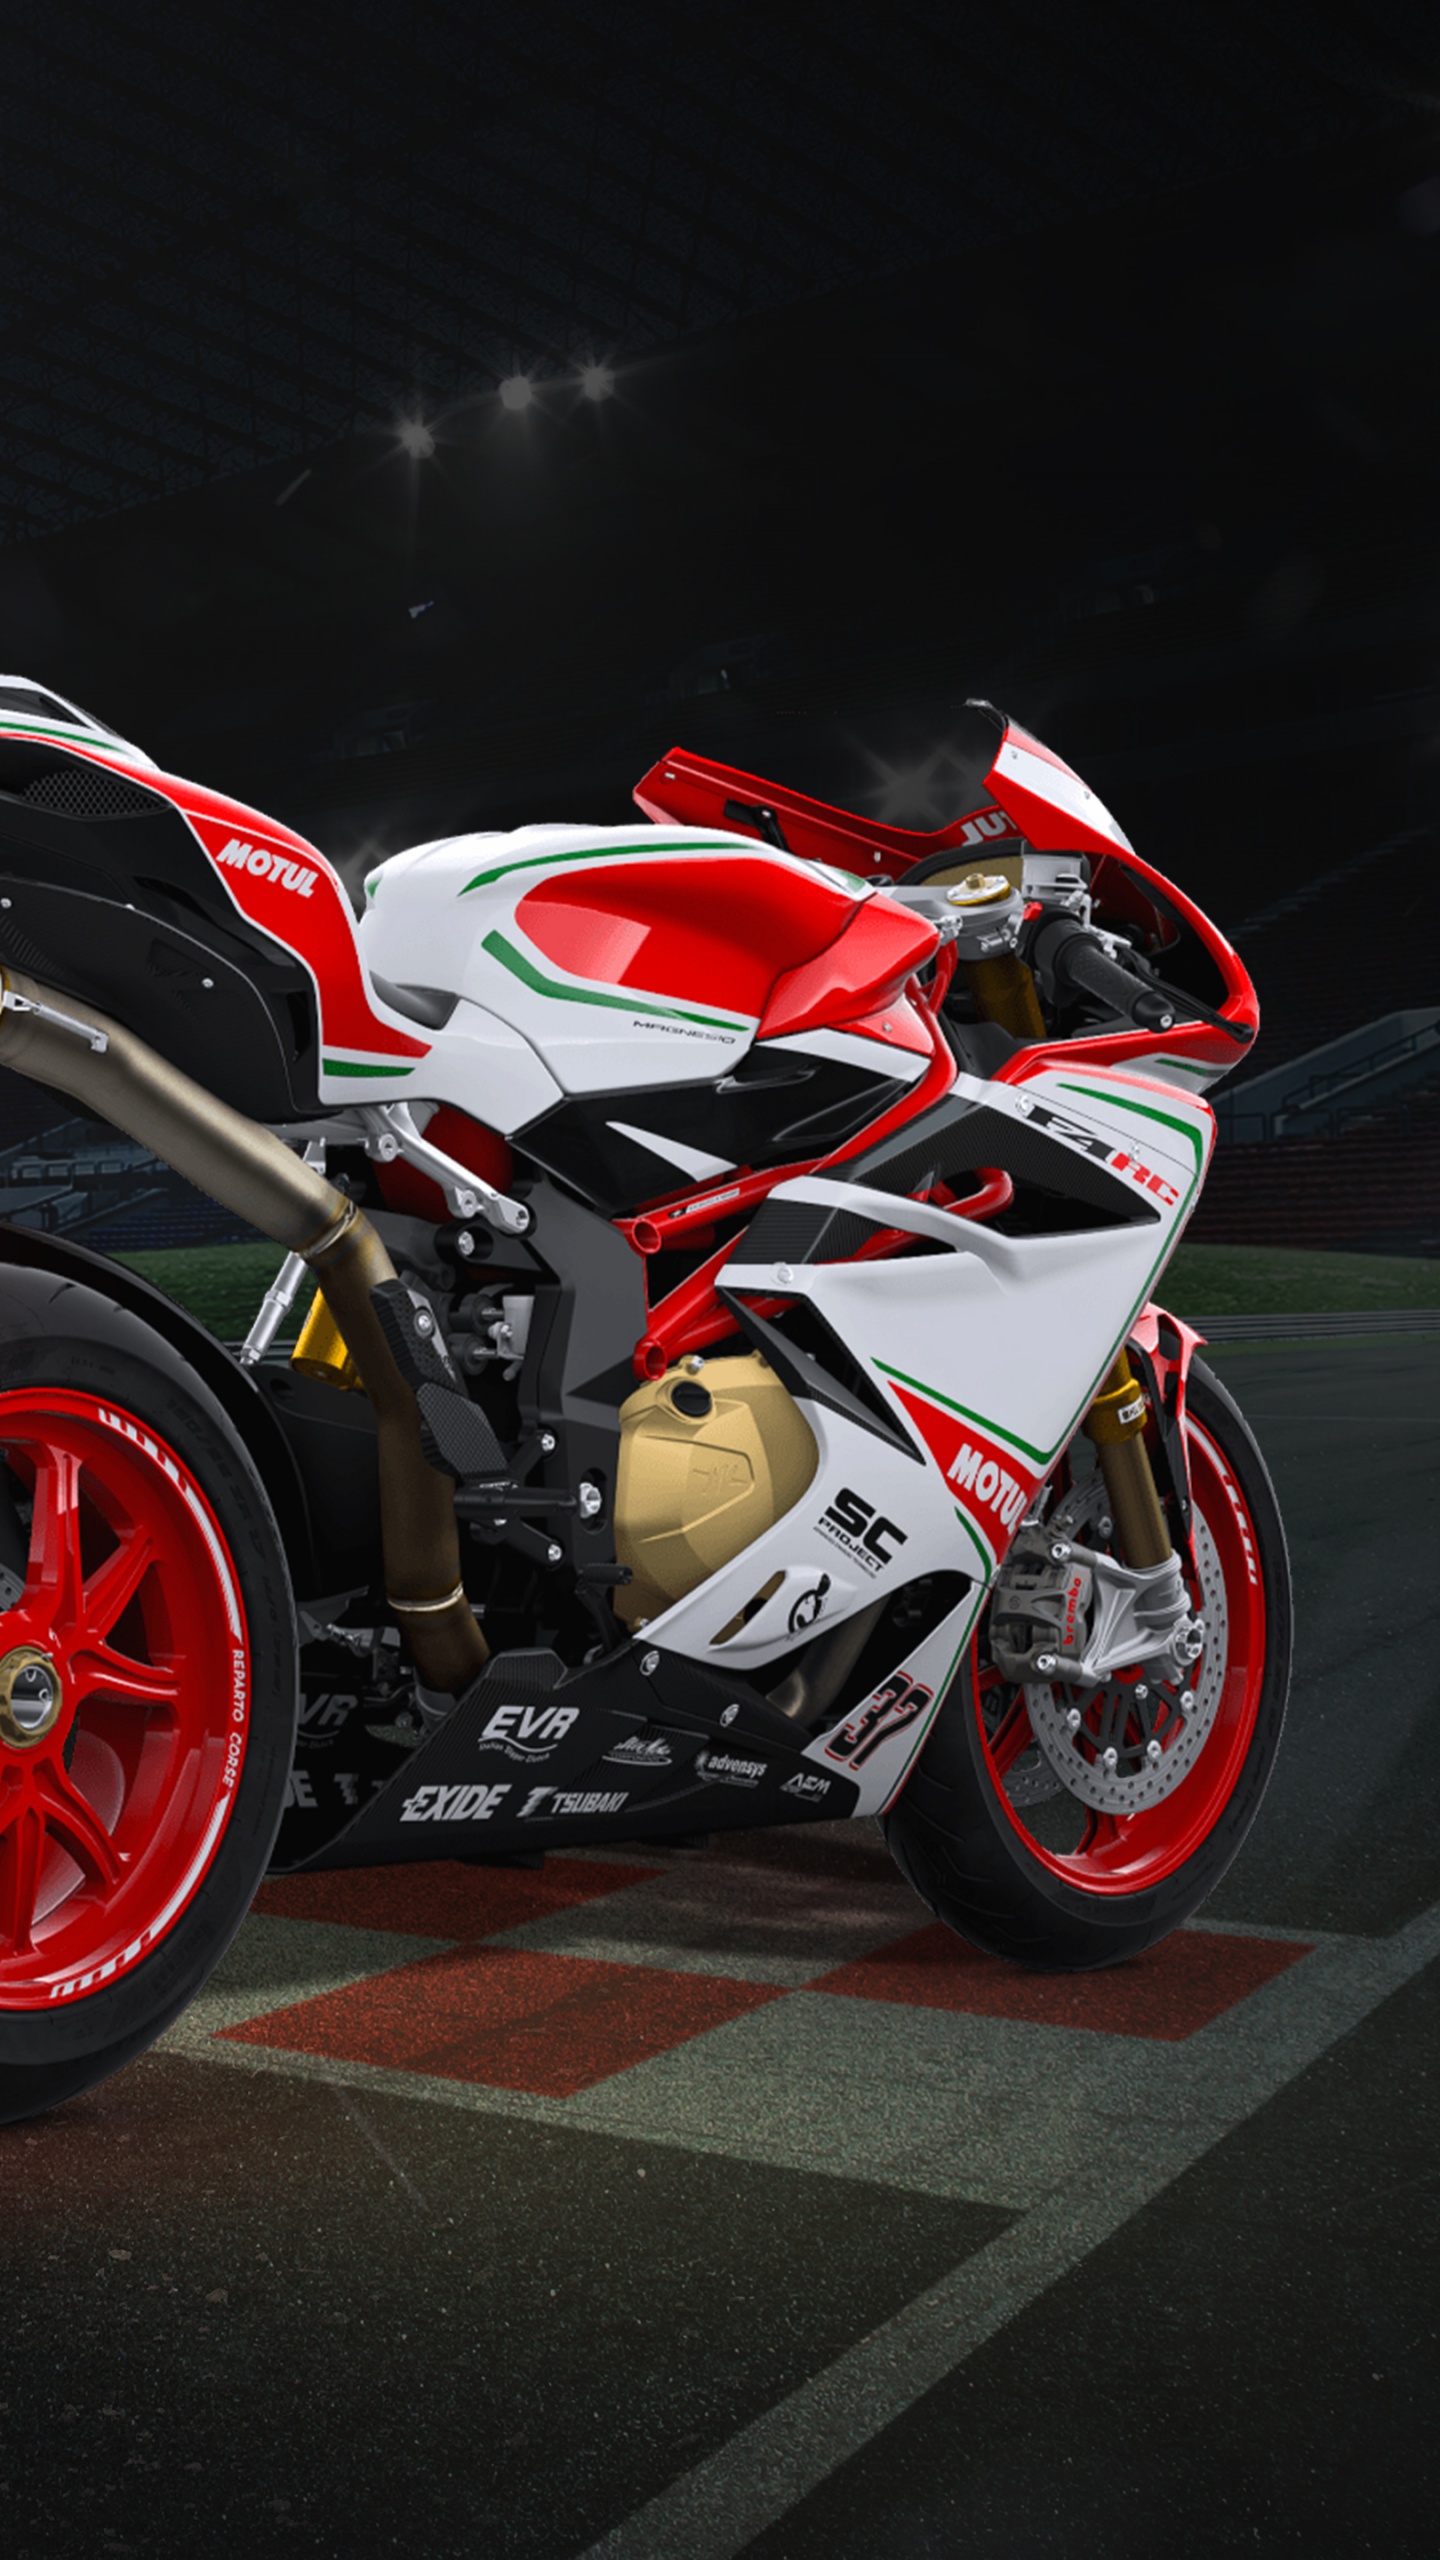 Red and White Sports Bike on Track Field. Wallpaper in 1440x2560 Resolution